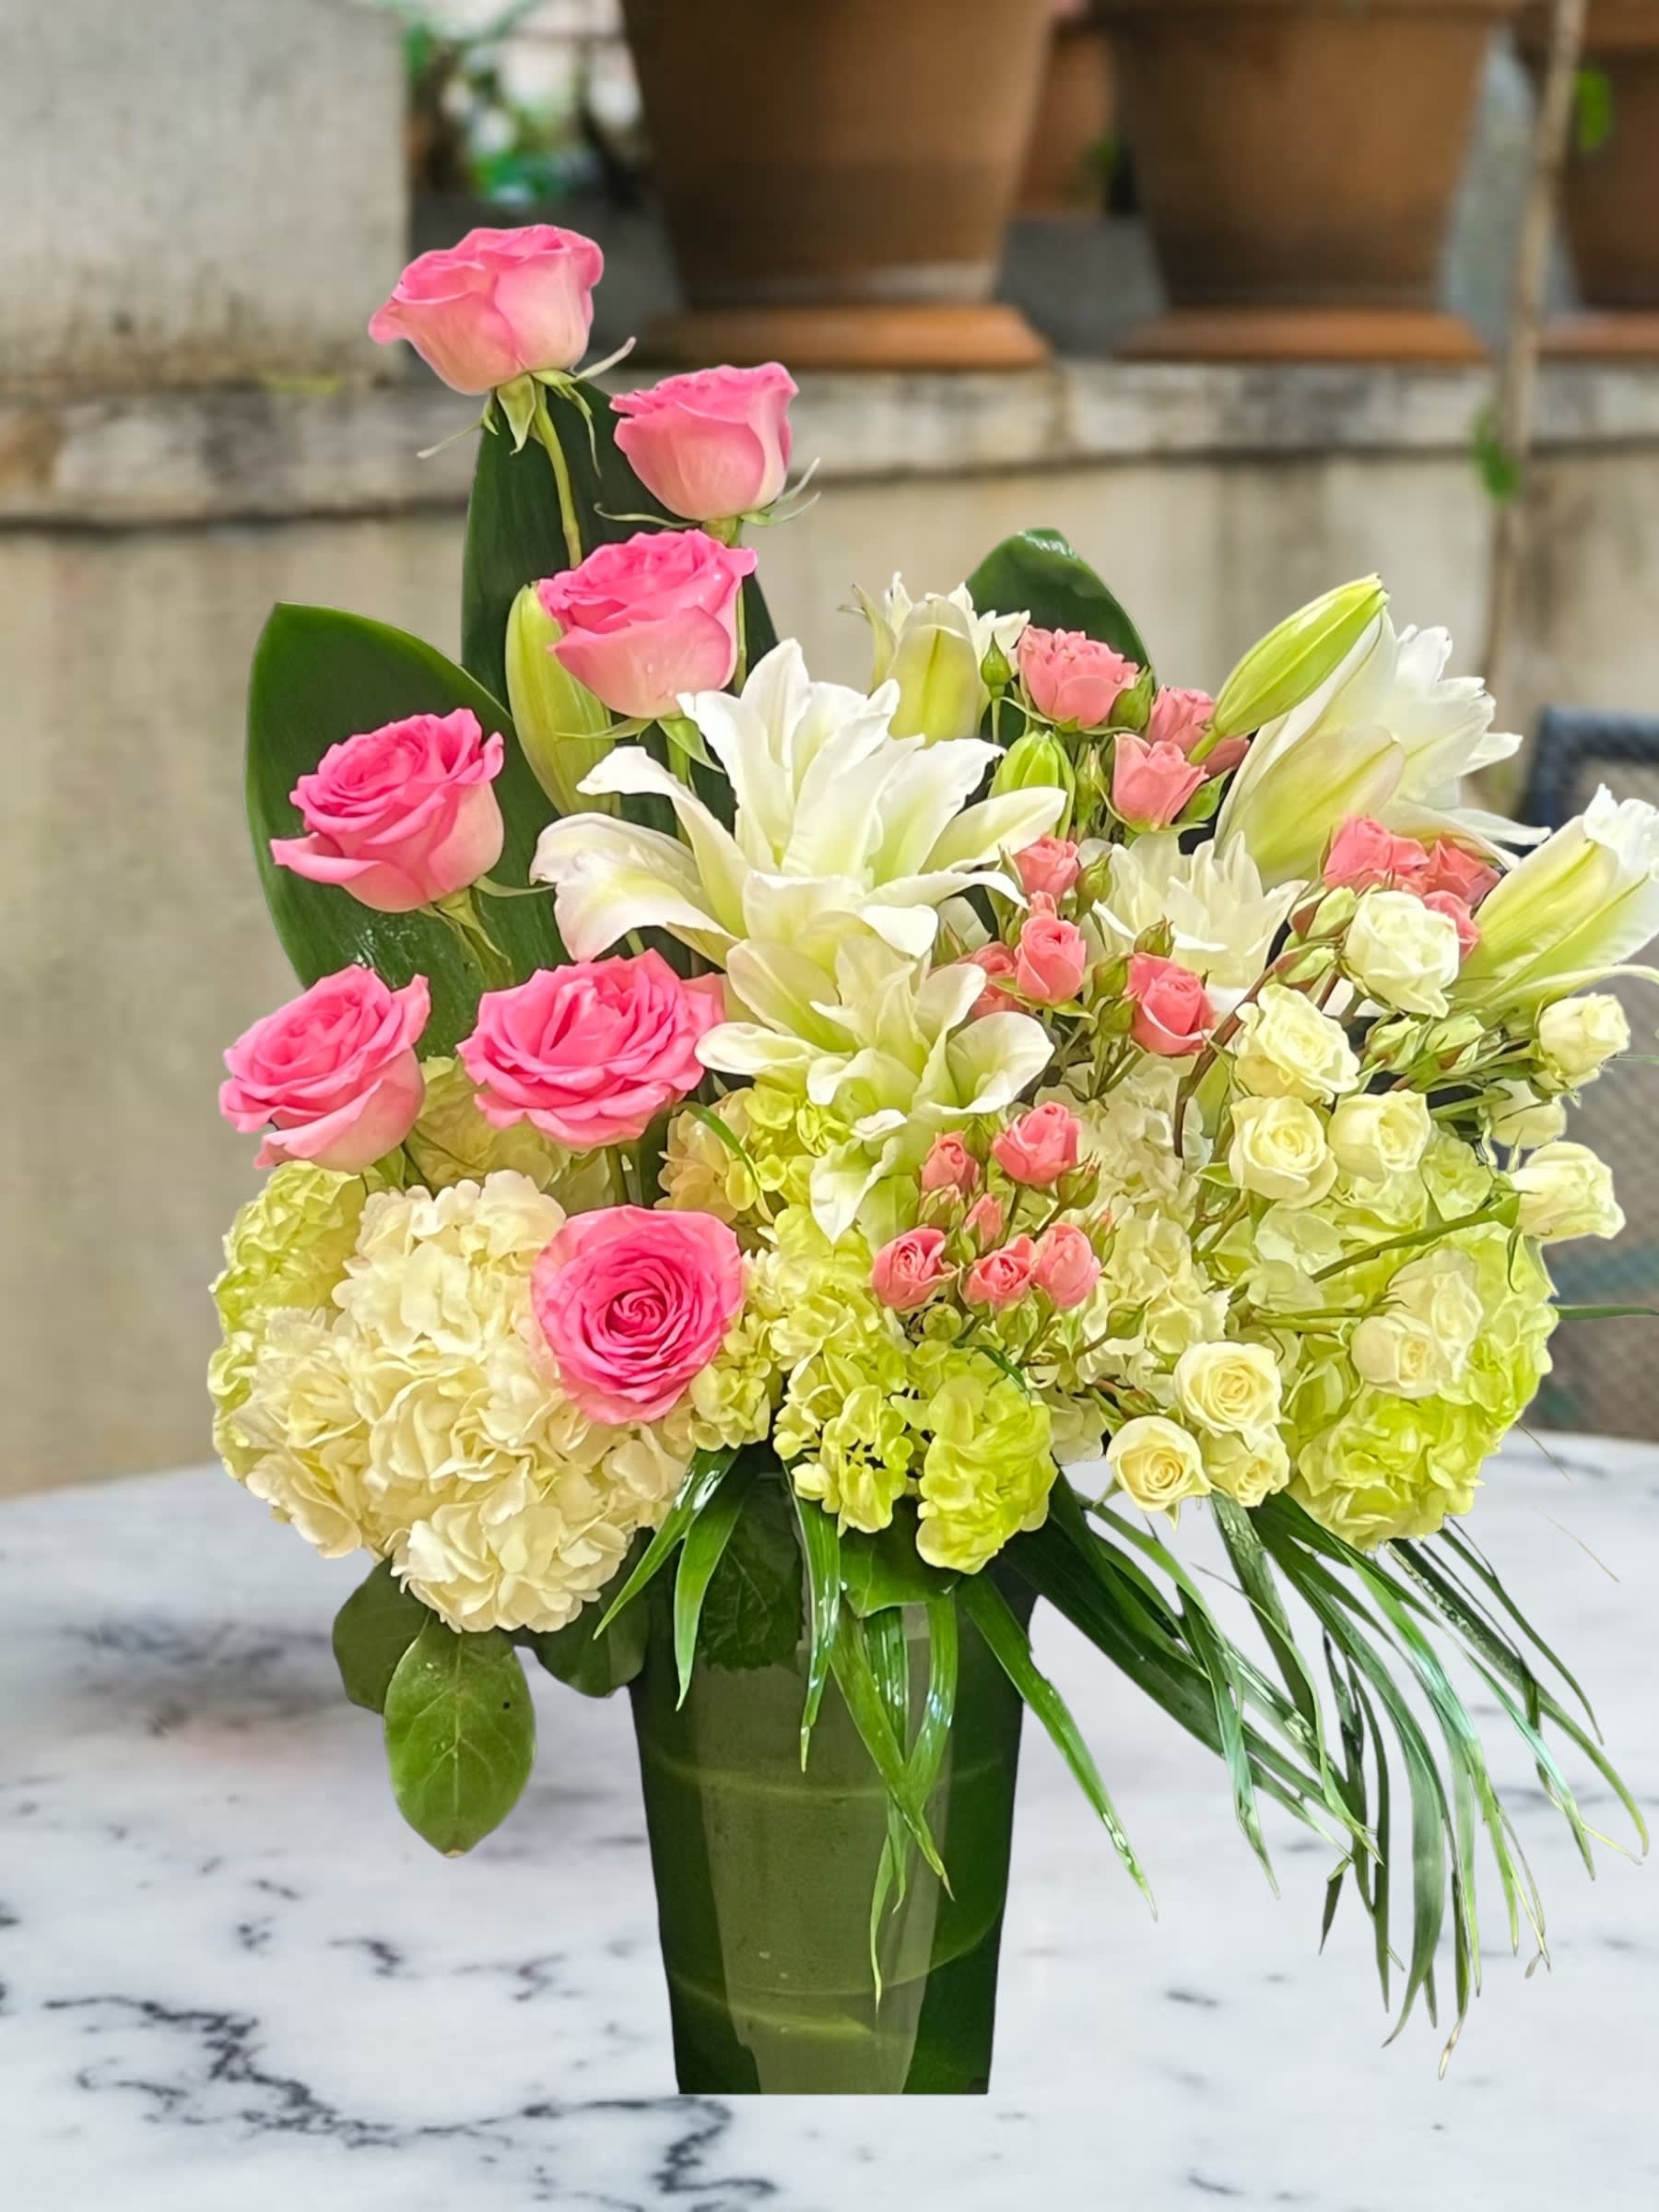 Celebrate  - The perfect gift to celebrate any occasion. Designed with hydrangeas and roses with other blooms. In a clear glass vase. 